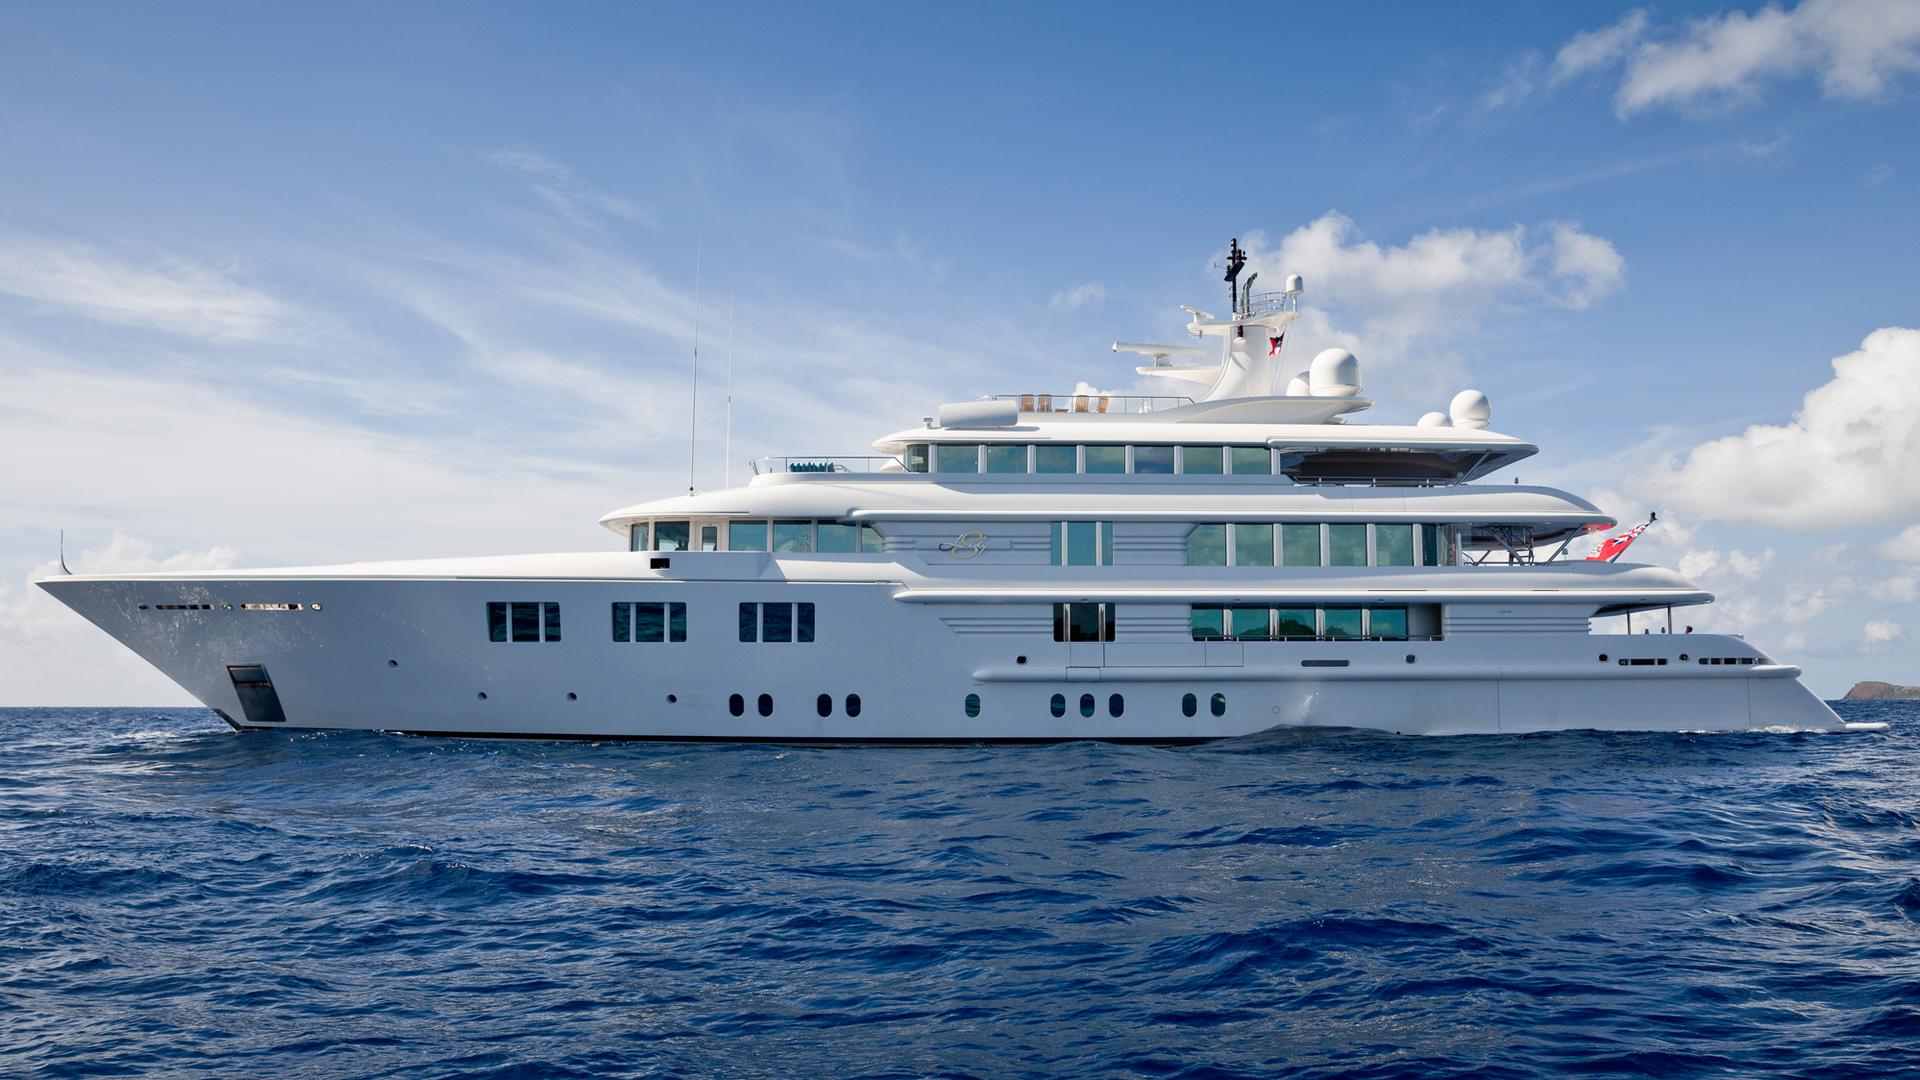 Motor-yacht-LADY-E-to-be-refitted-at-Pendennis-and-relaunched-in-2020.jpg